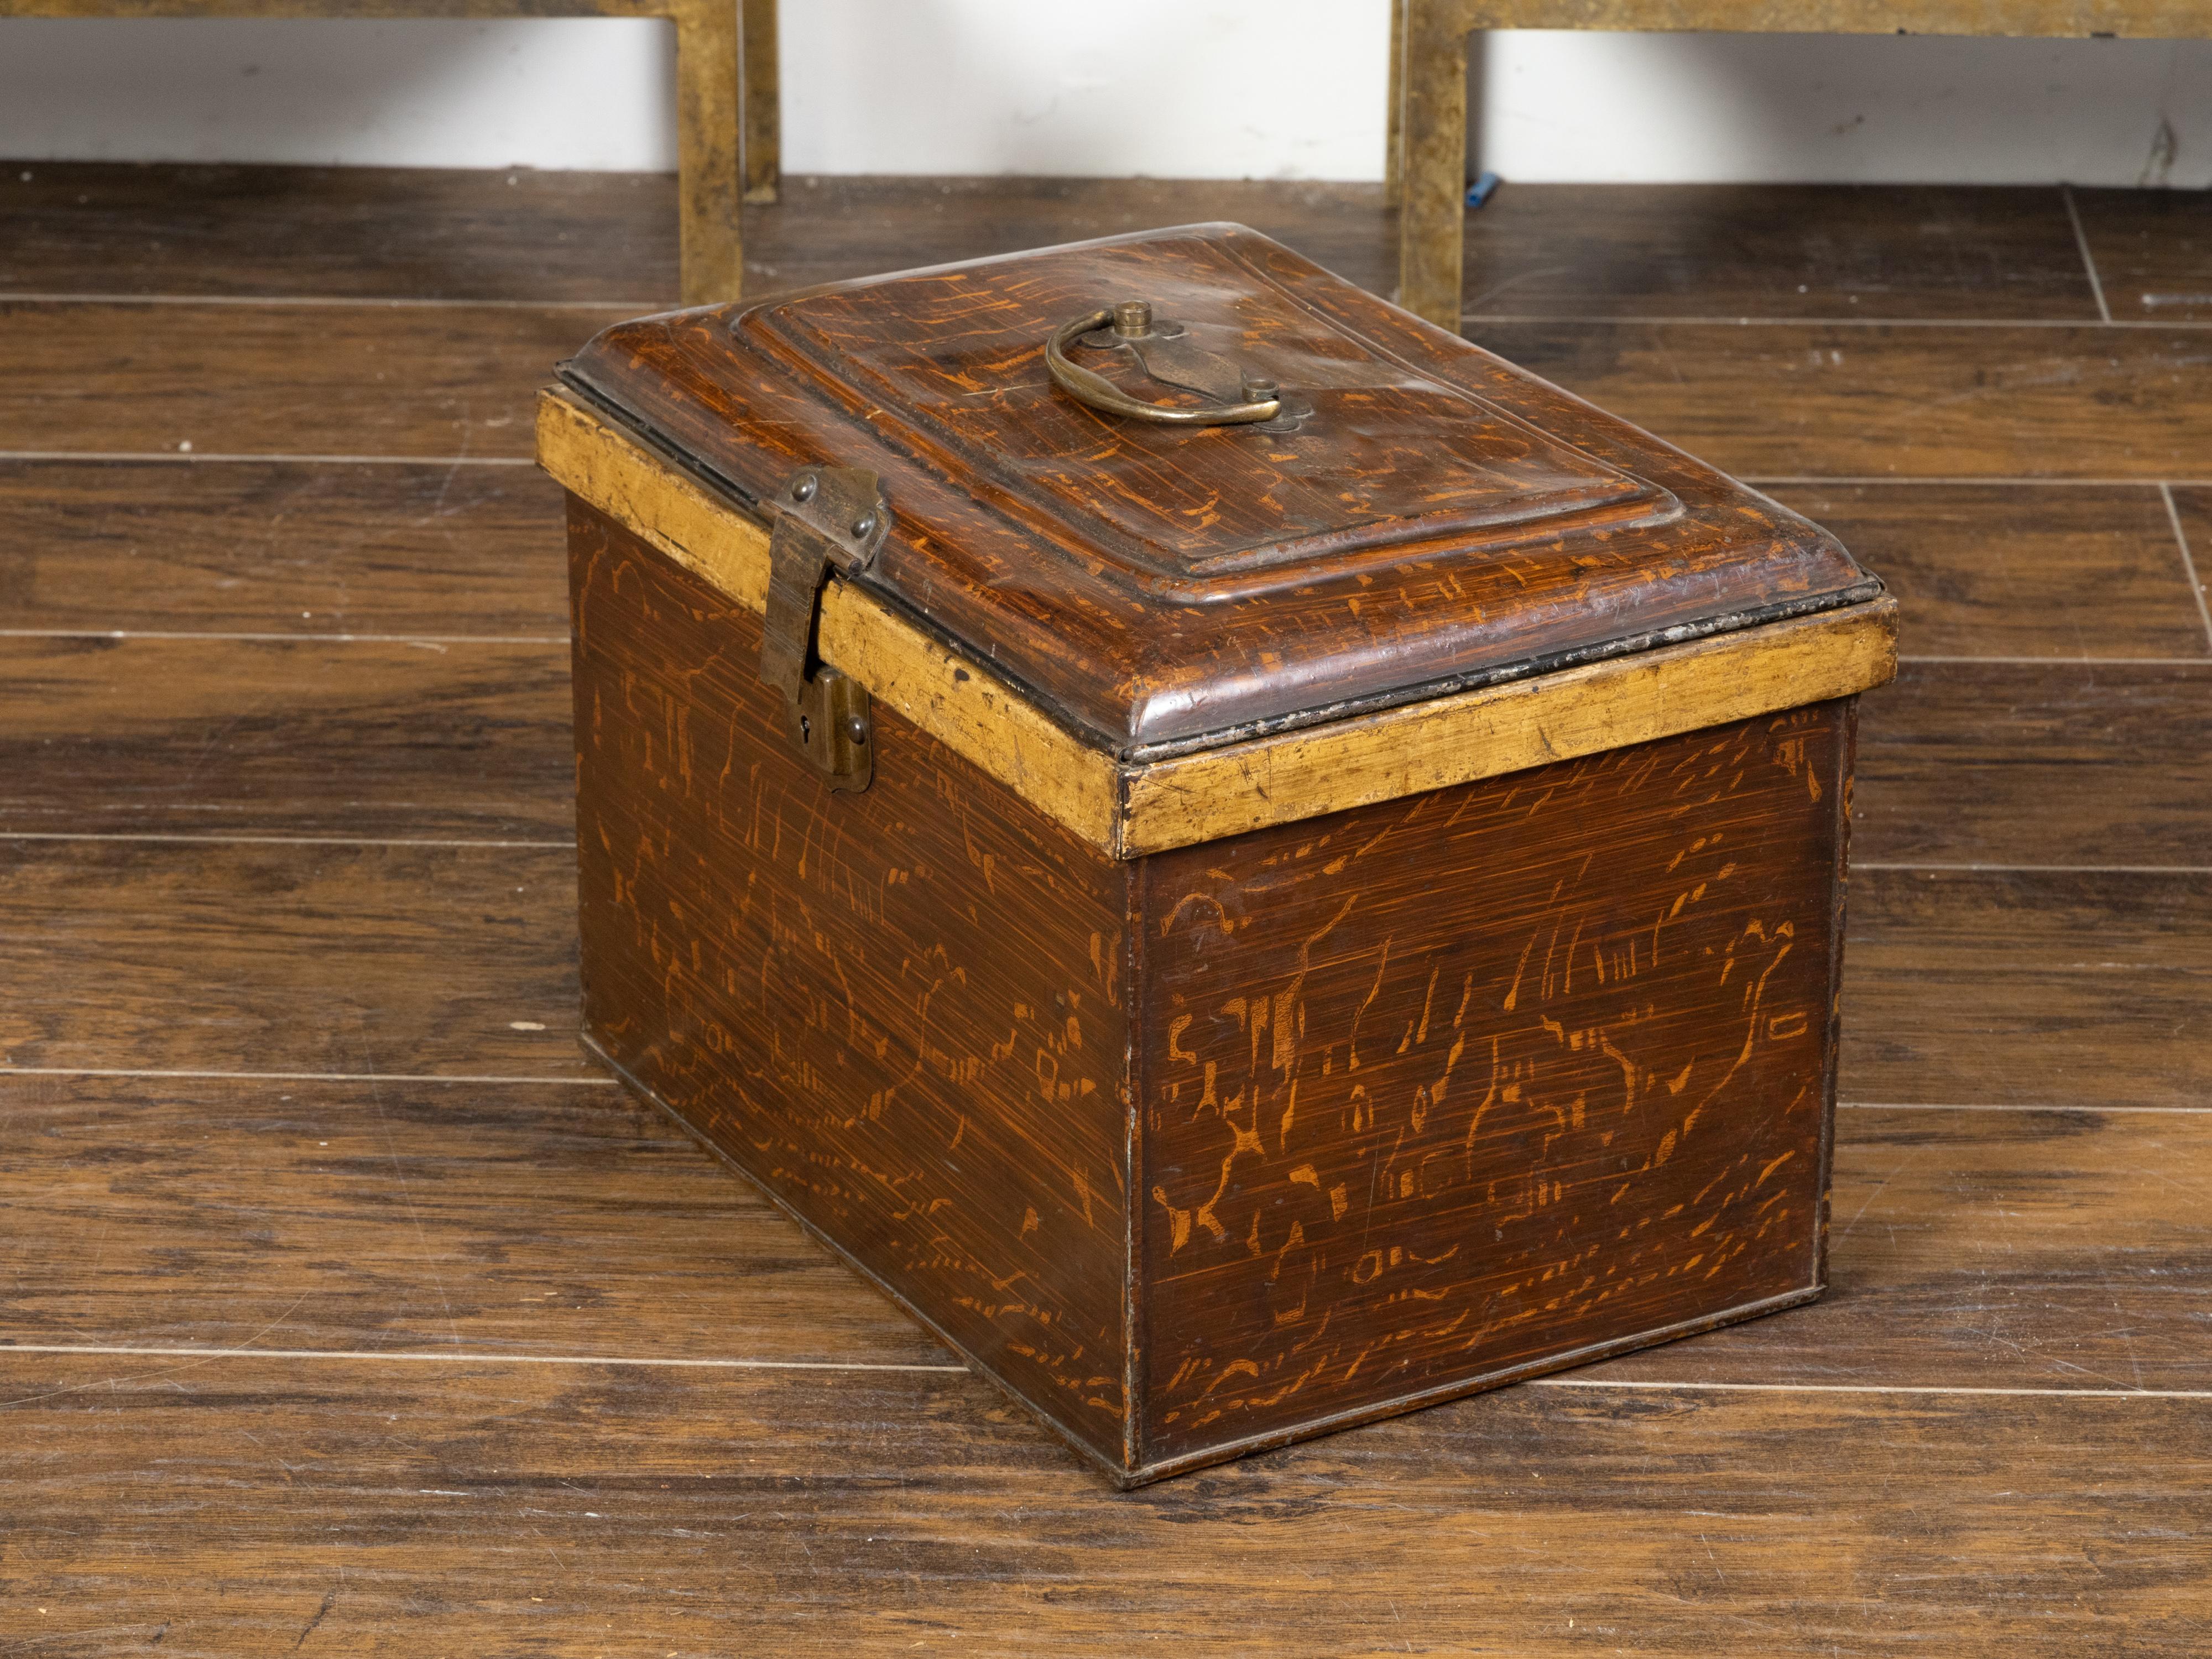 French 1890s Rustic Painted Tôle Box with Wood Grain Finish and Goldenrod Accent For Sale 7